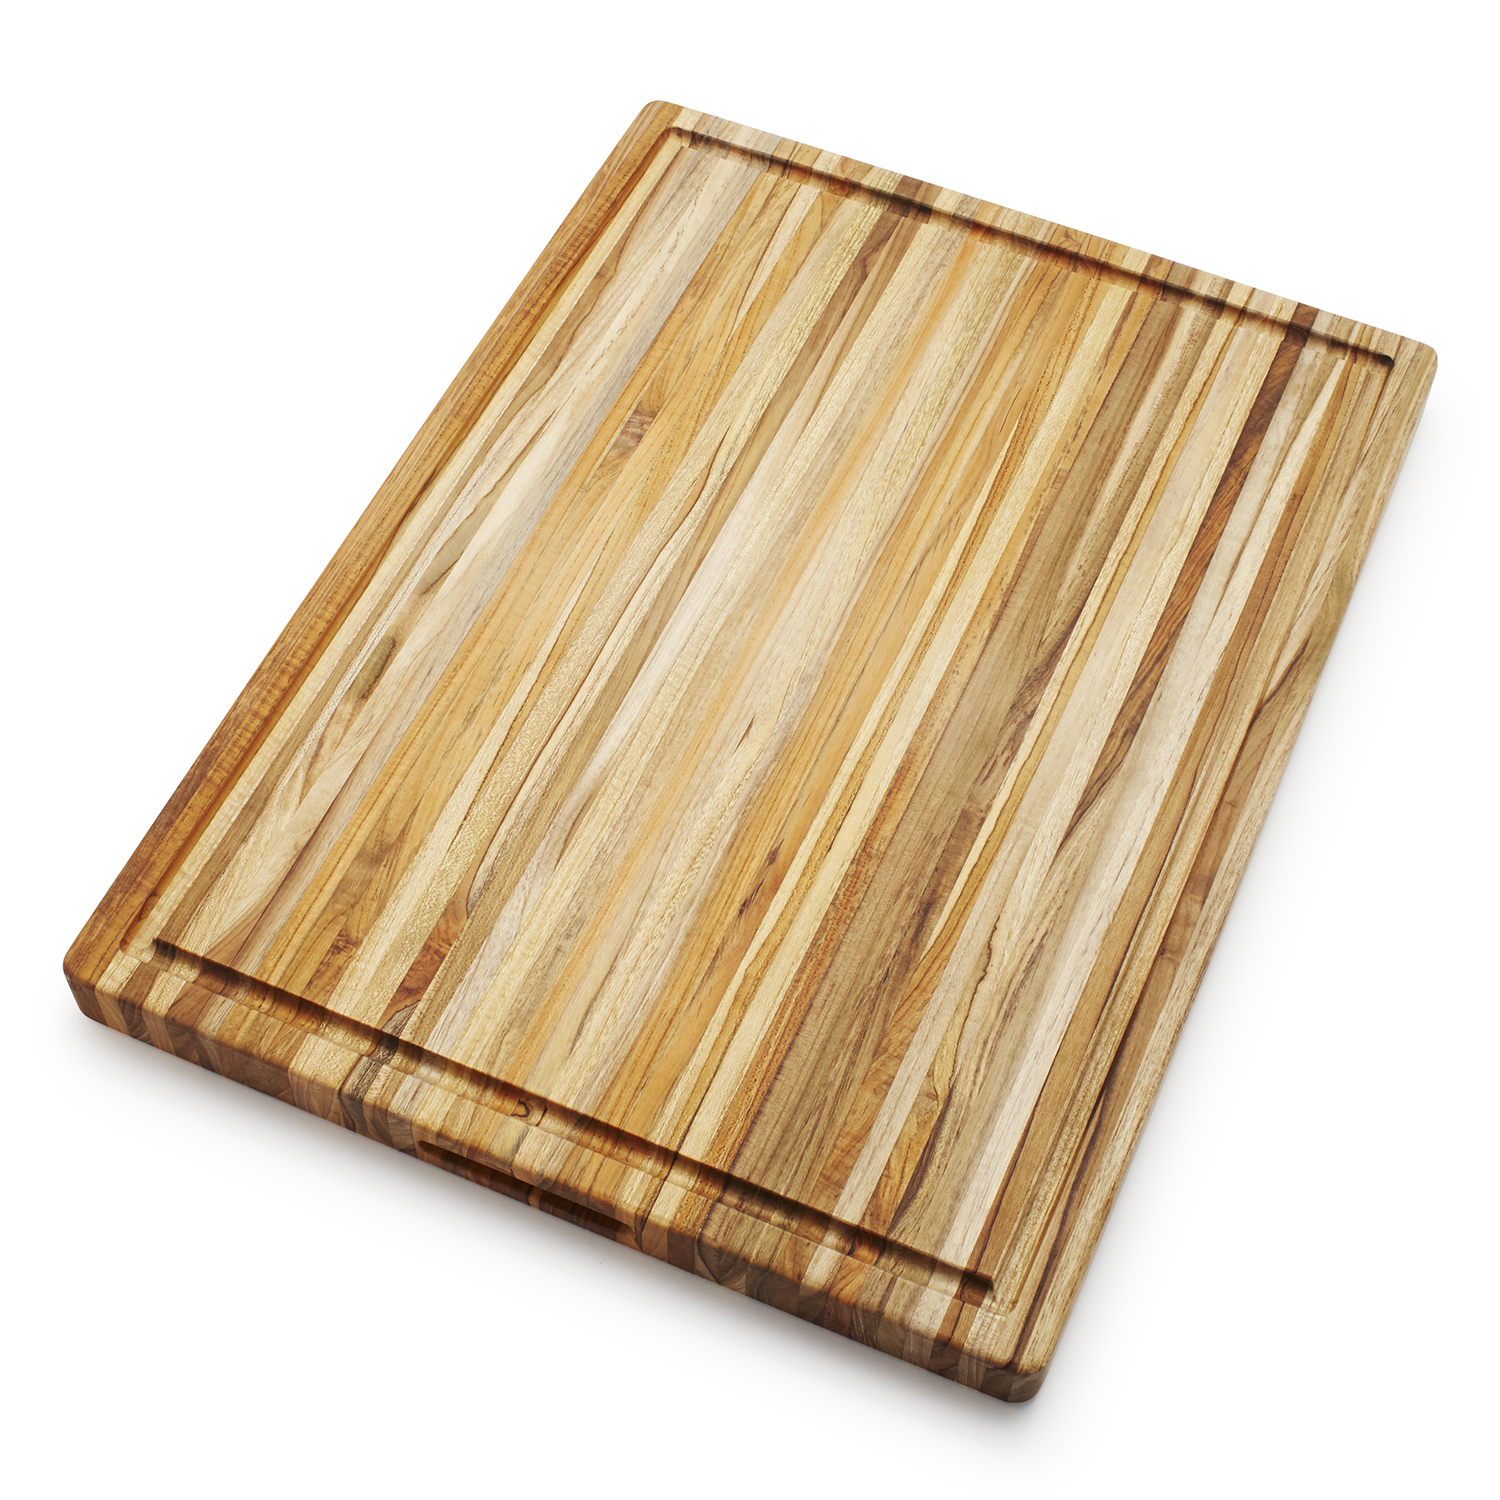 Solid Teak Cutting Board Rectangular Edge Grain with Custom Hand Grips and Exclusive No Skid No Mar Feet. By Teak For Less 20x15x1.5 Inches 